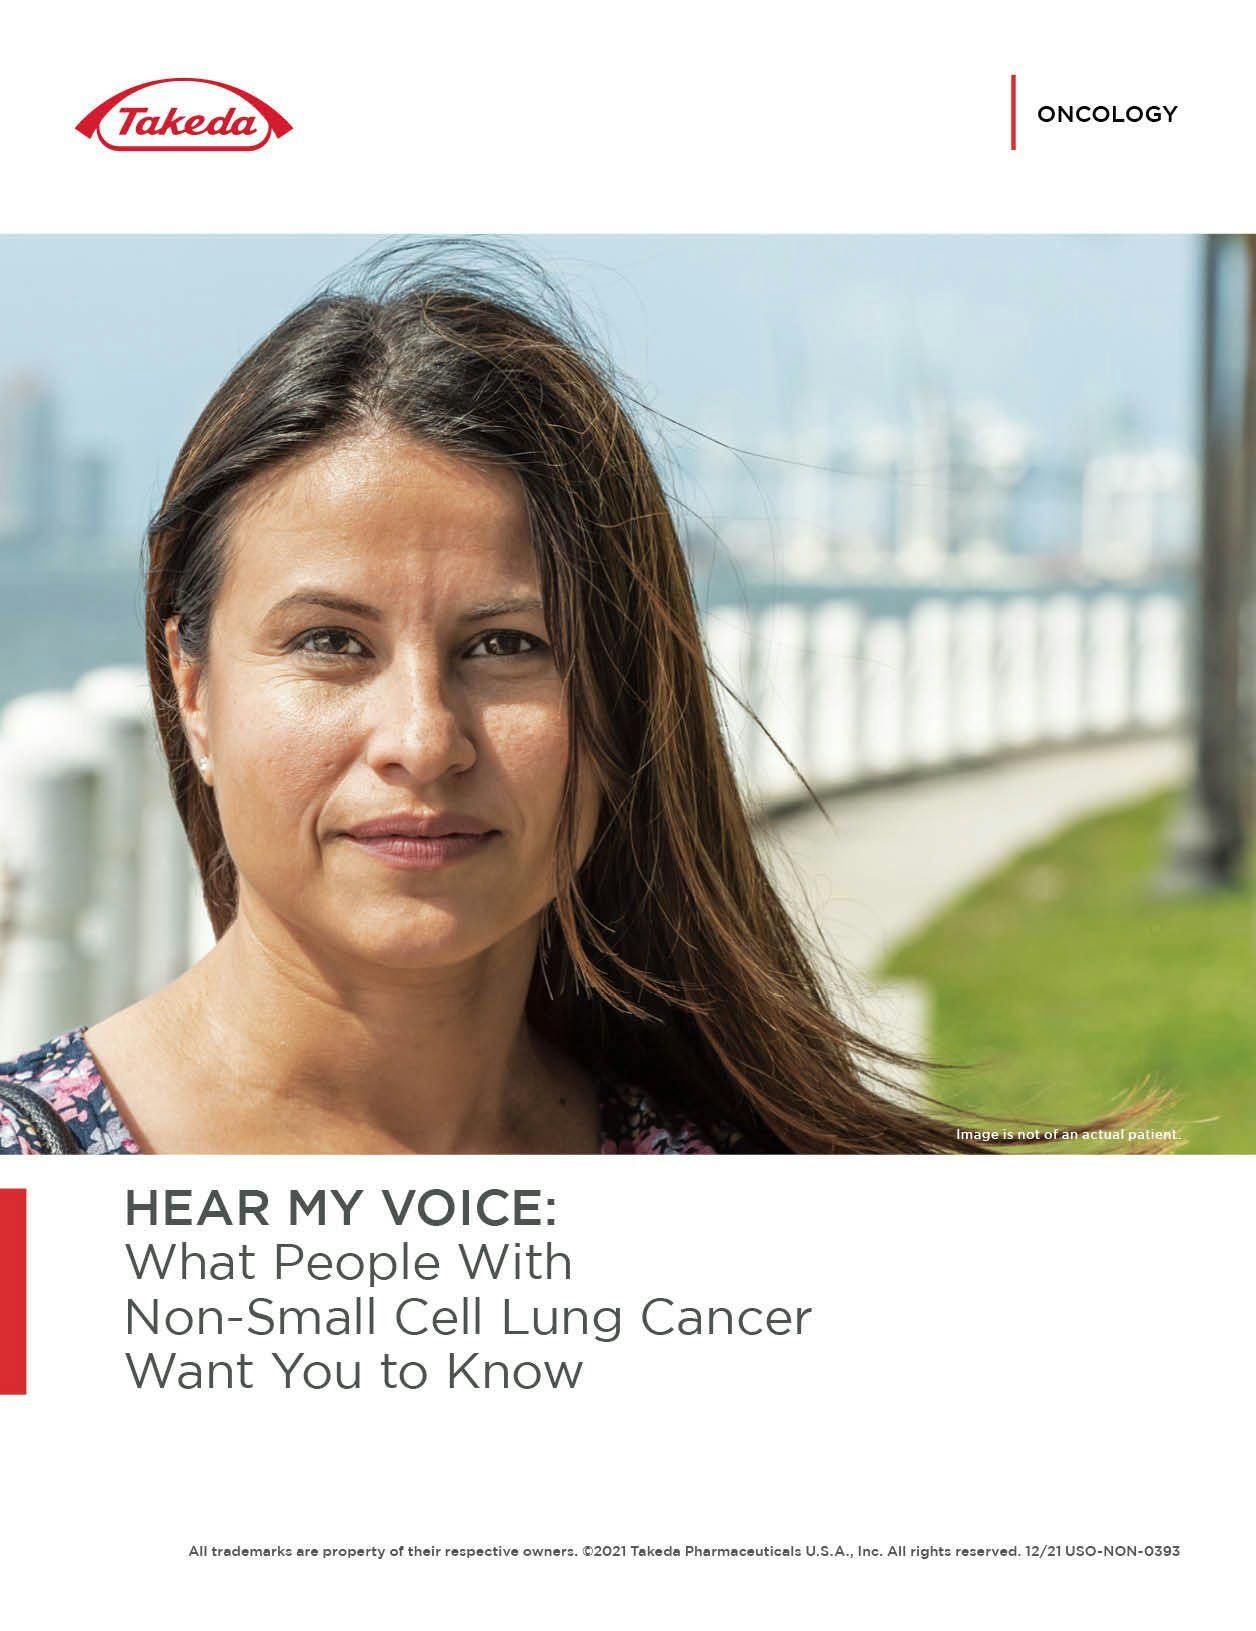 HEAR MY VOICE: What People With Non-Small Cell Lung Cancer Want You to Know